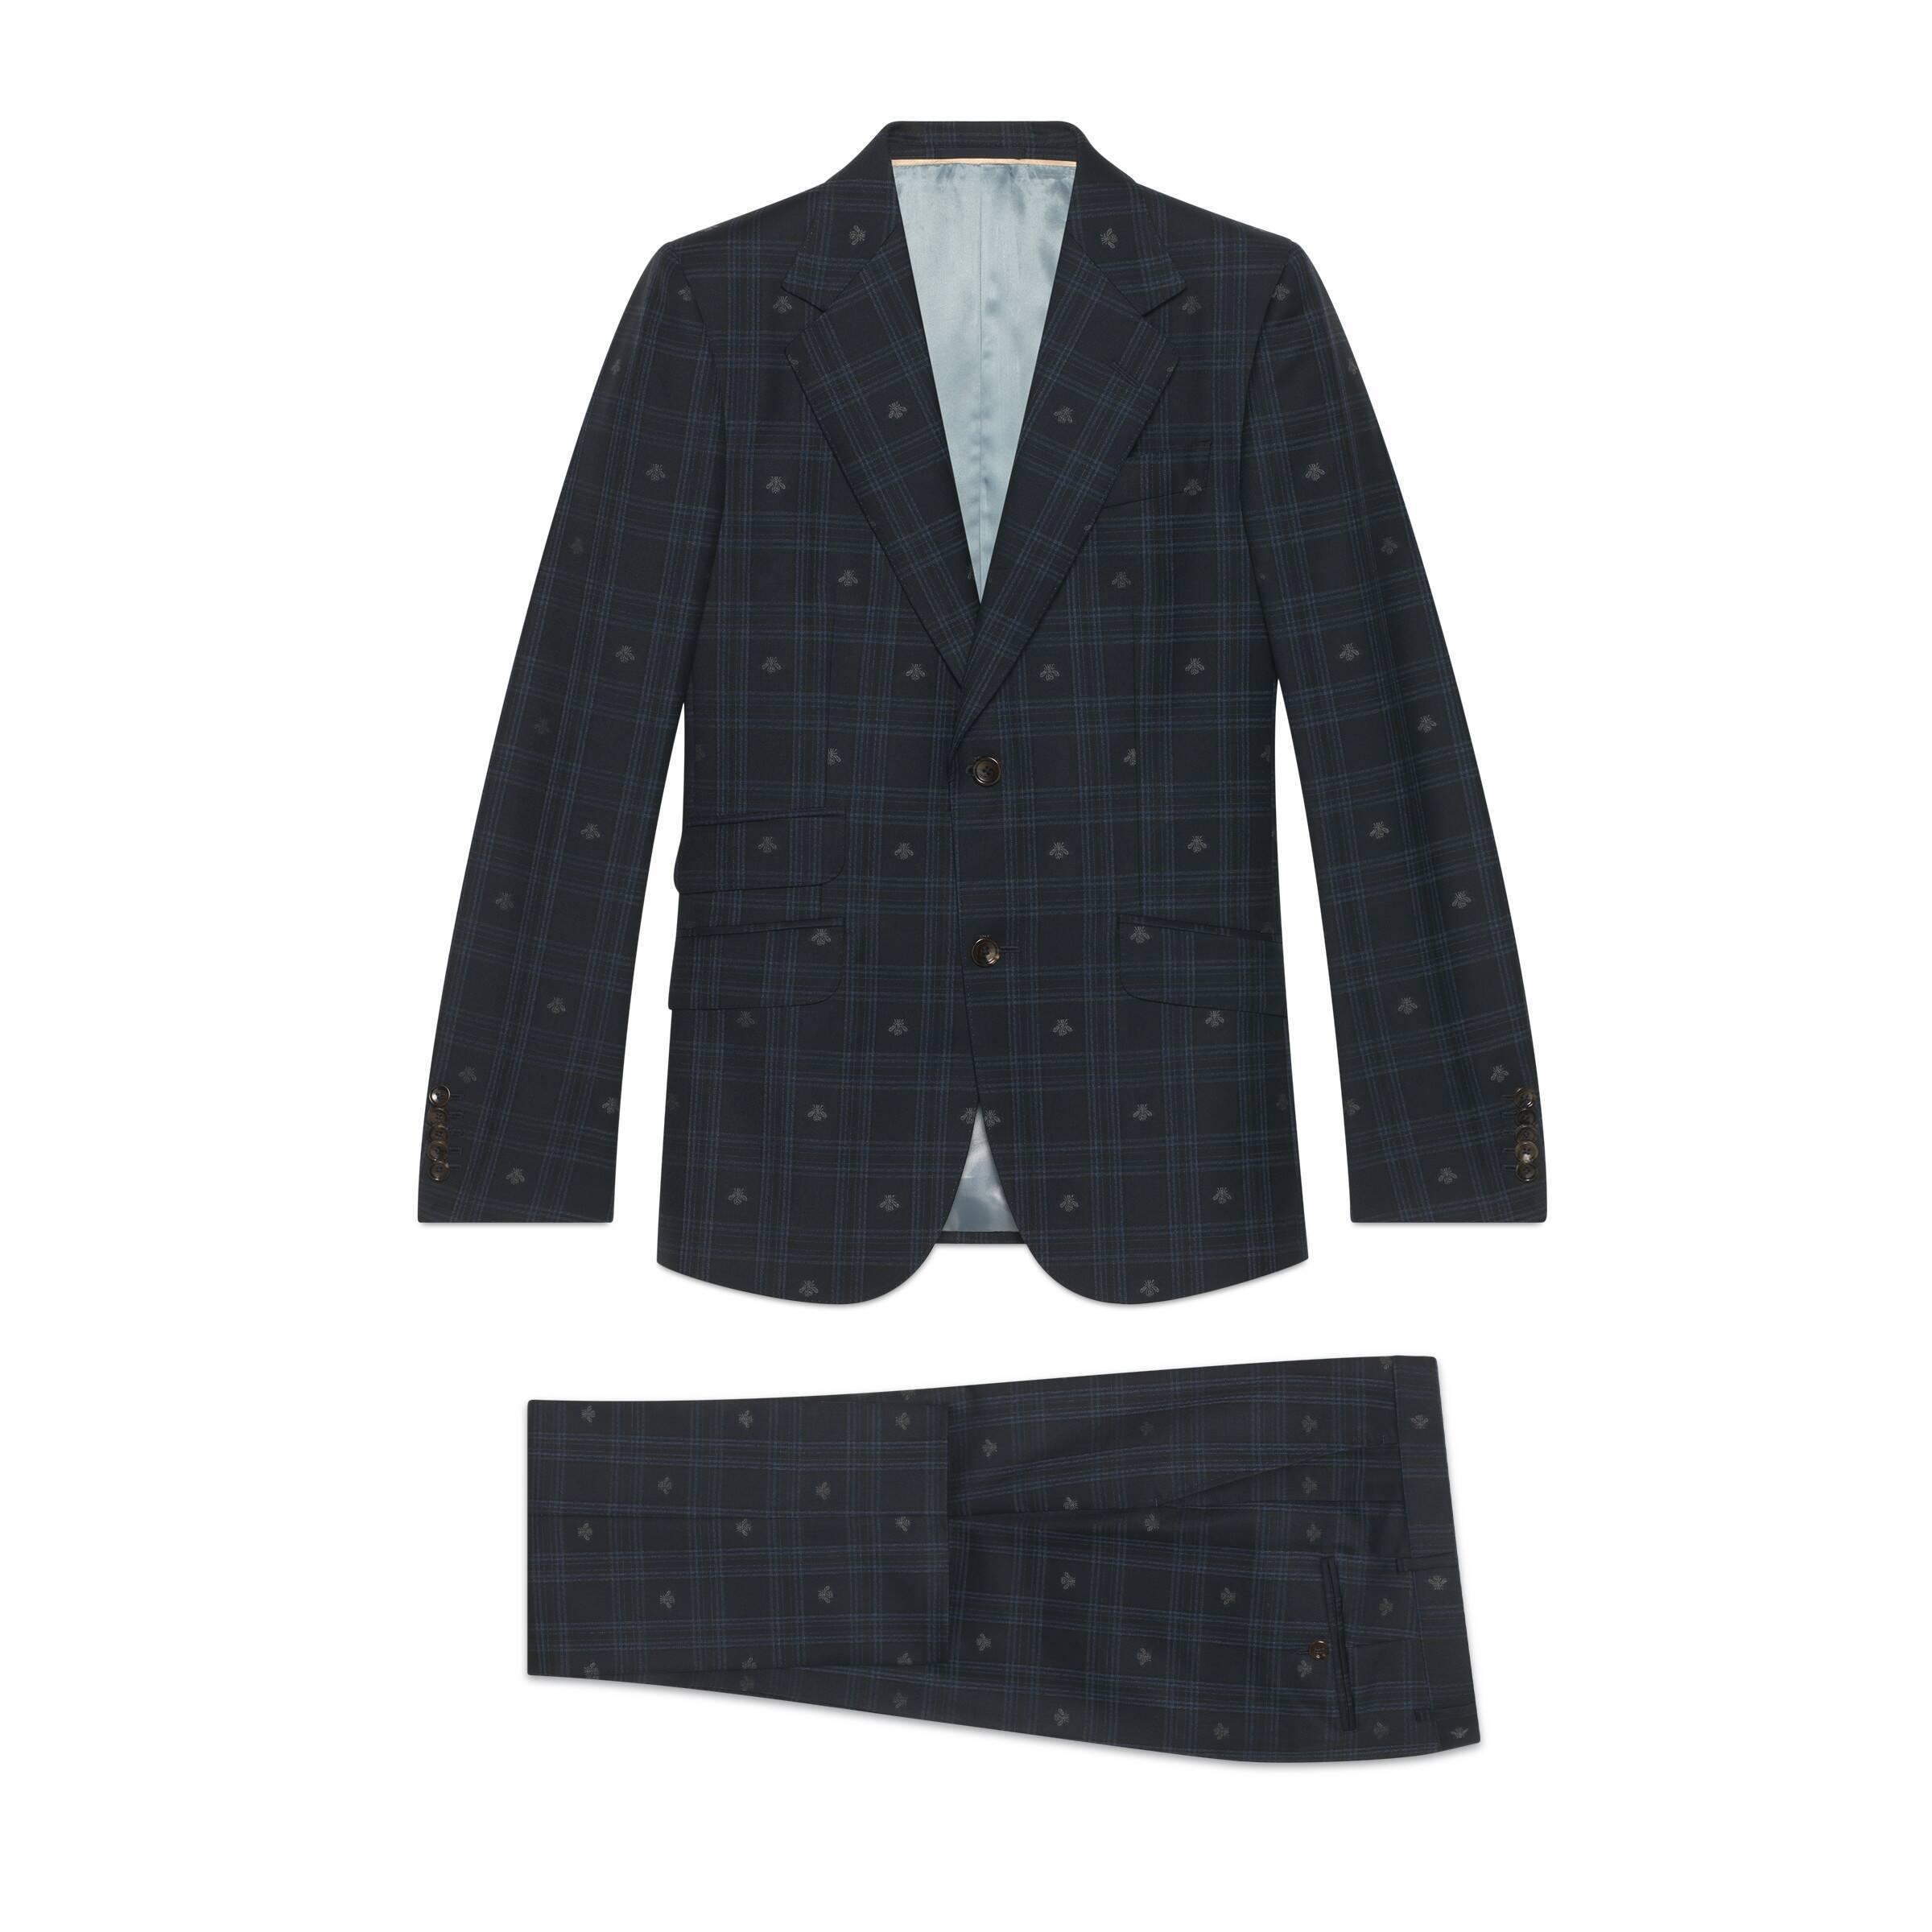 Gucci Fitted Bee Check Wool Suit in Blue for Men - Lyst